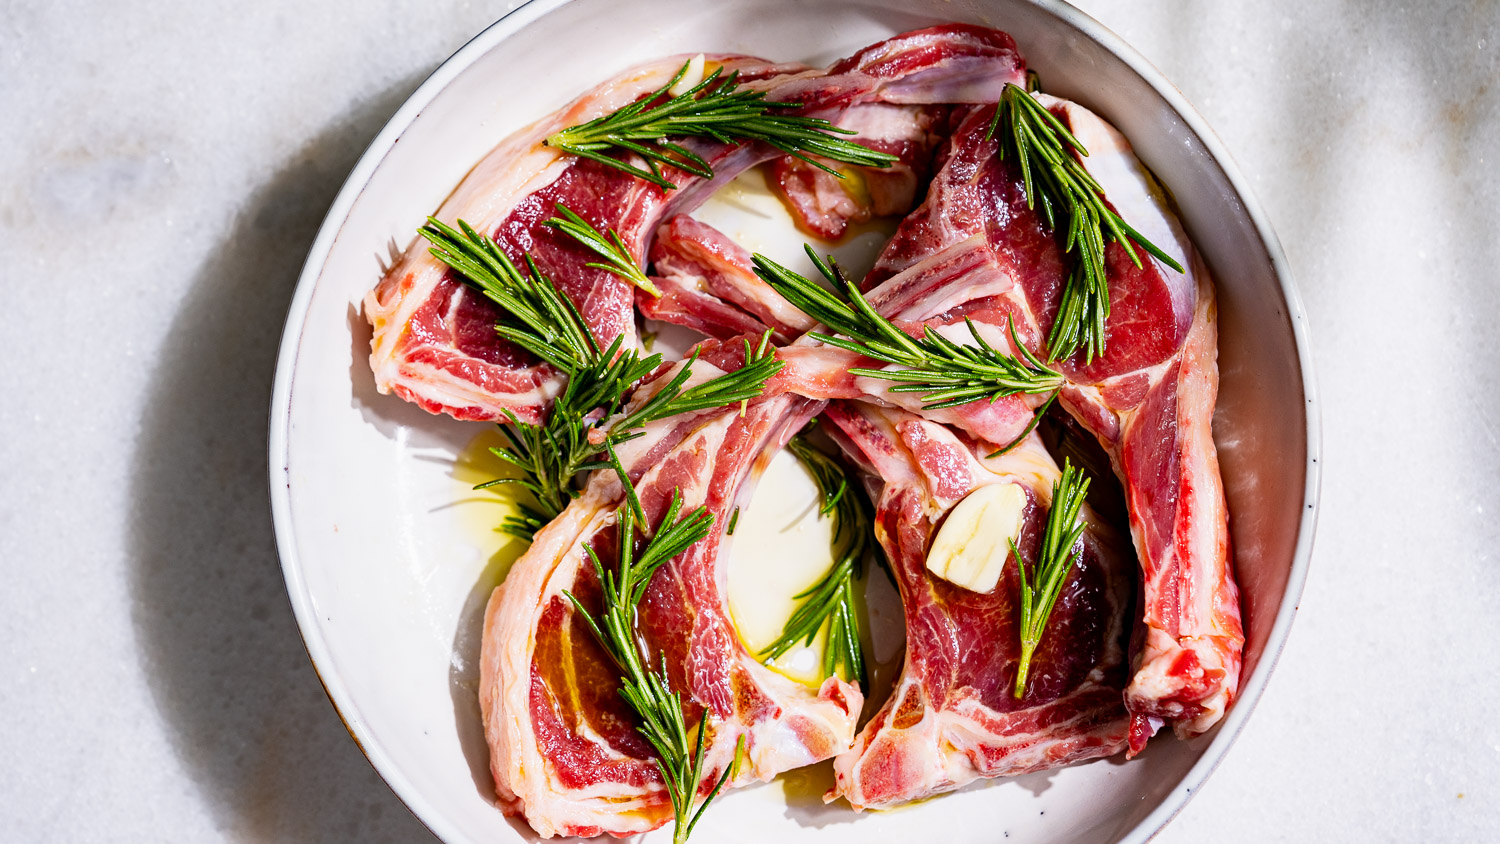 Marinated lamb chops with olive oil, garlic, rosemary and salt.